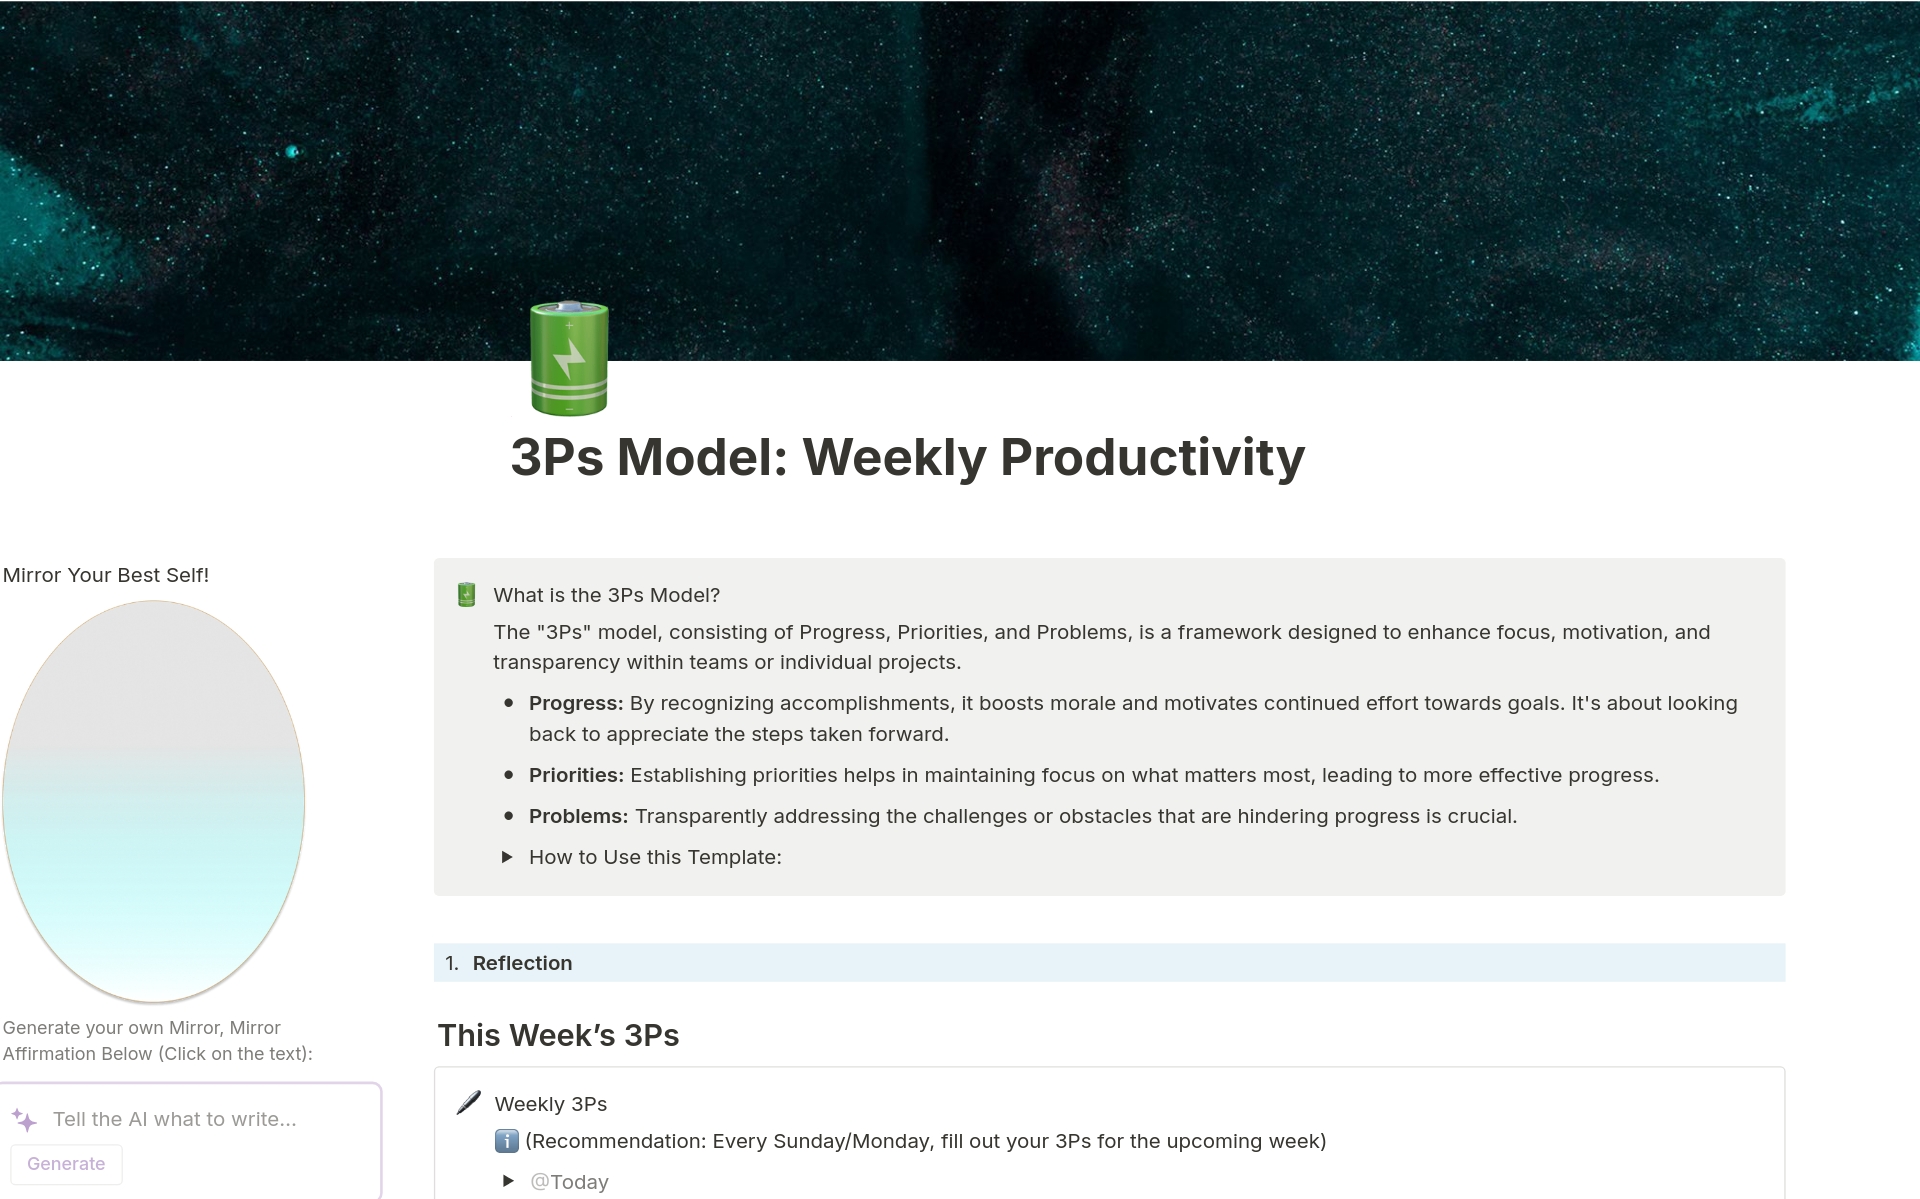 Ever felt like you had so many things to do but struggled to focus on the important items to move things forward? I felt the same until I started incorporating the 3Ps model into my weekly and daily schedule. 